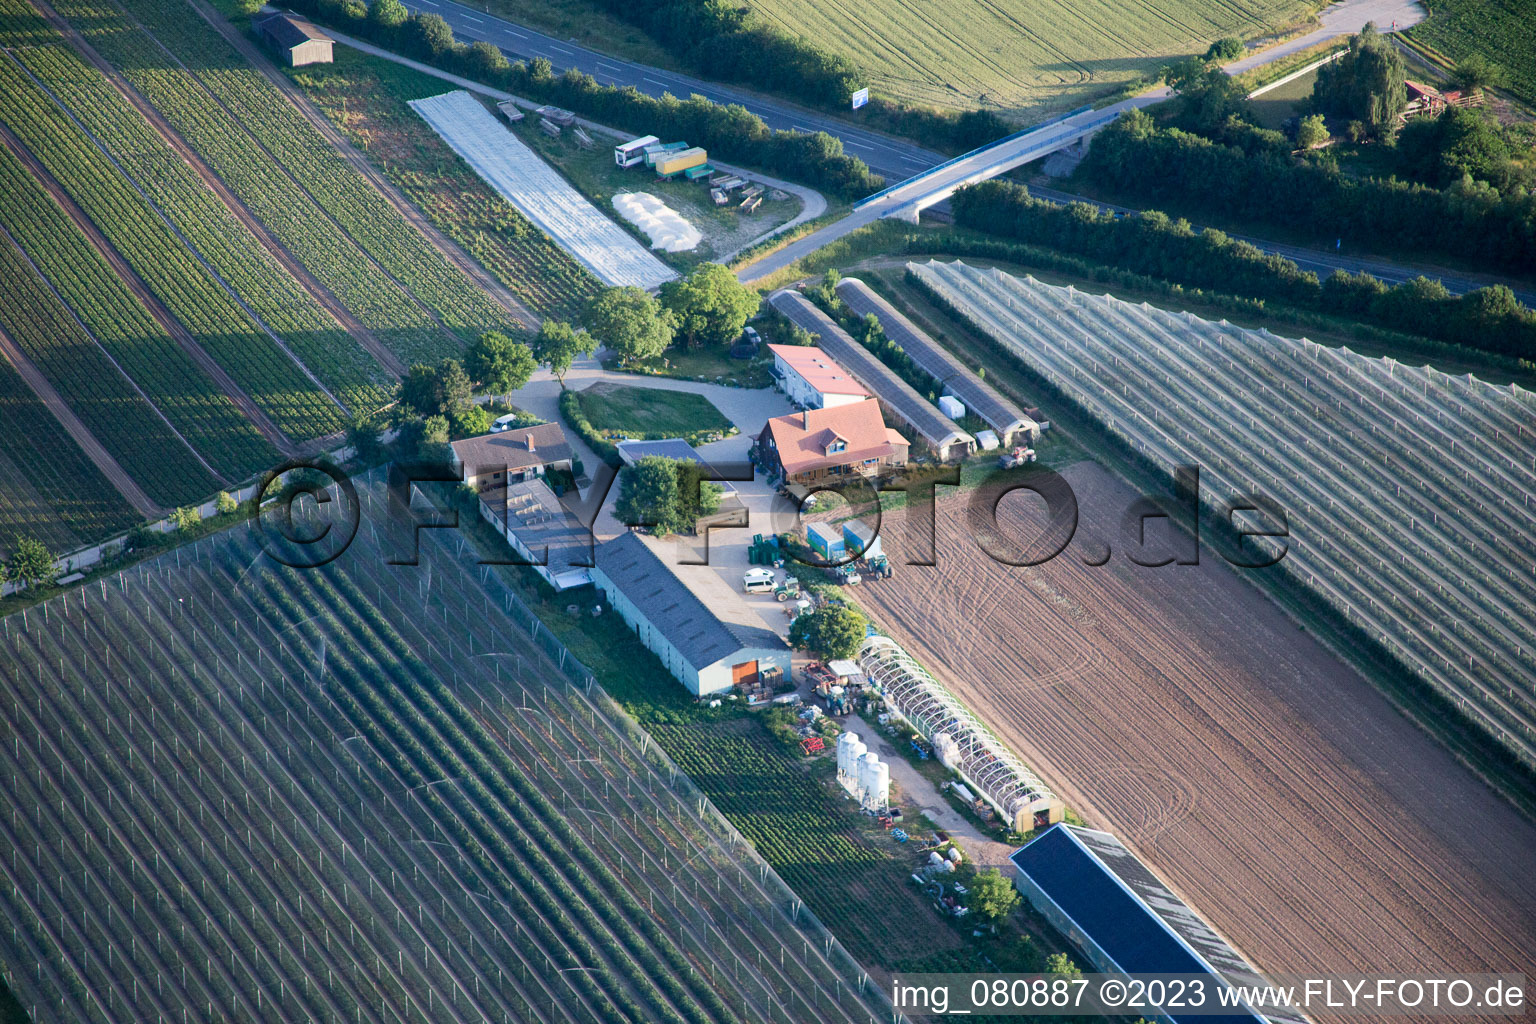 Kandel in the state Rhineland-Palatinate, Germany seen from above